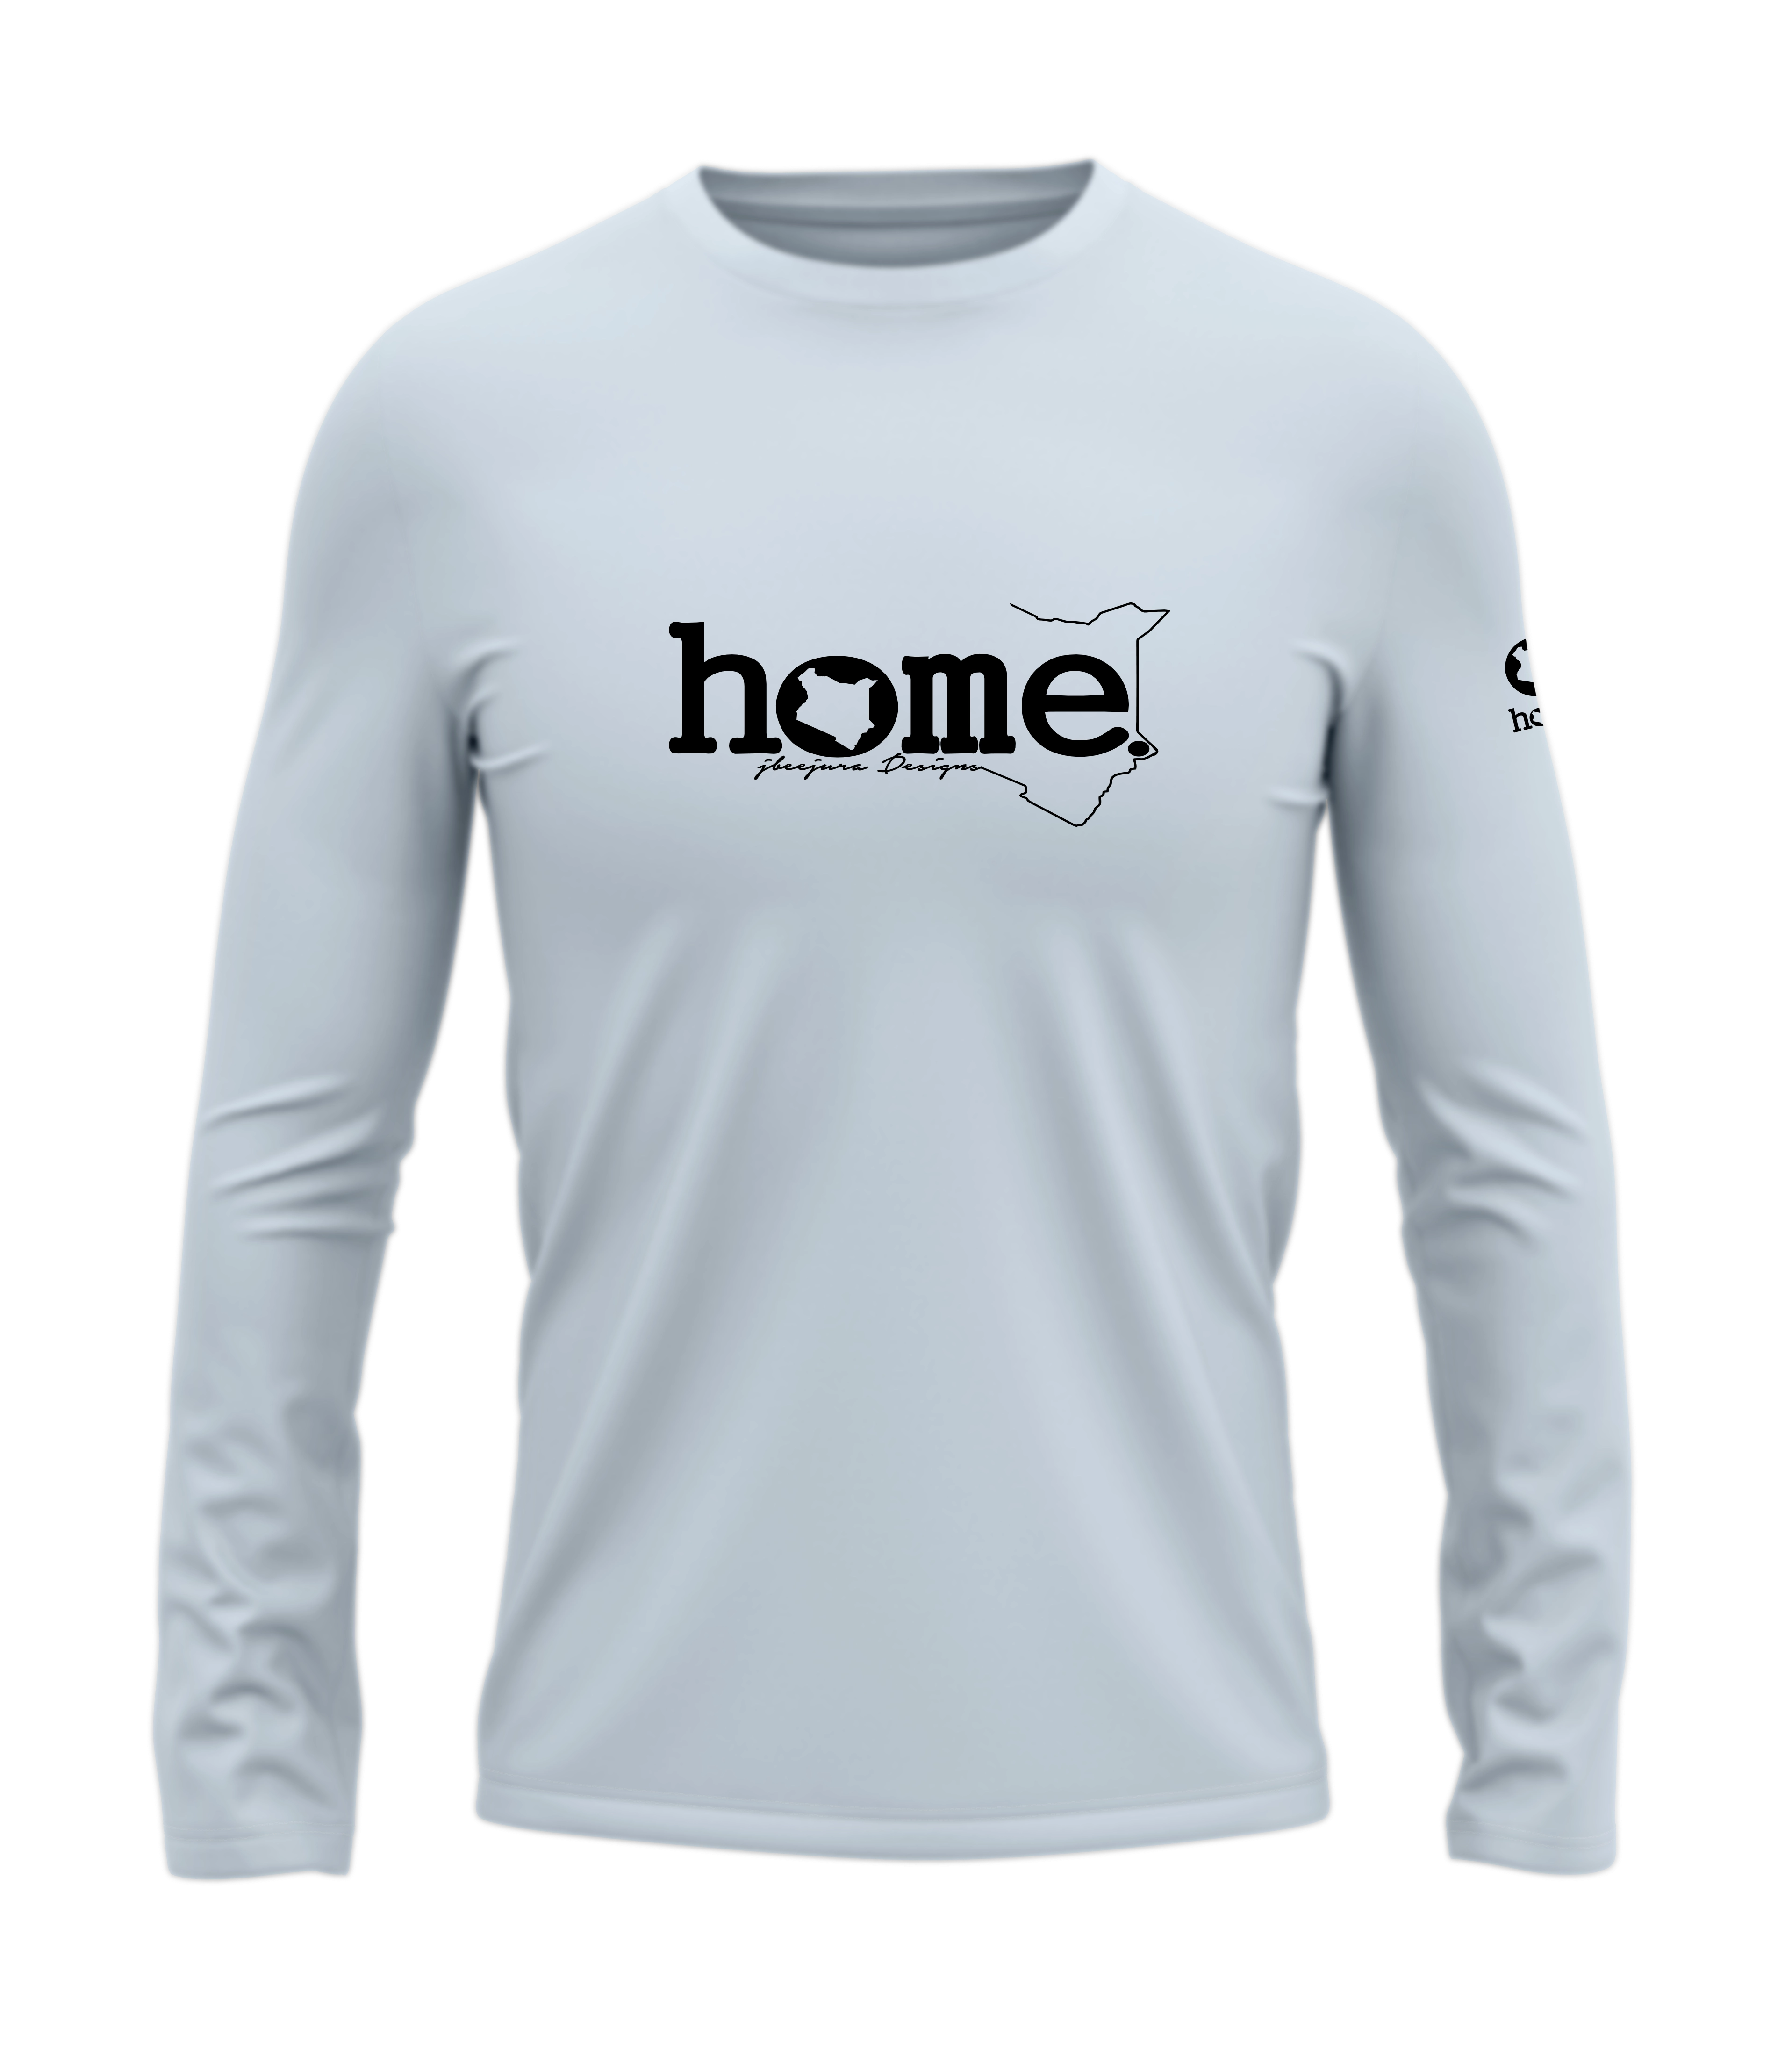 home_254 LONG-SLEEVED SKY-BLUE T-SHIRT WITH A BLACK CLASSIC WORDS PRINT – COTTON PLUS FABRIC